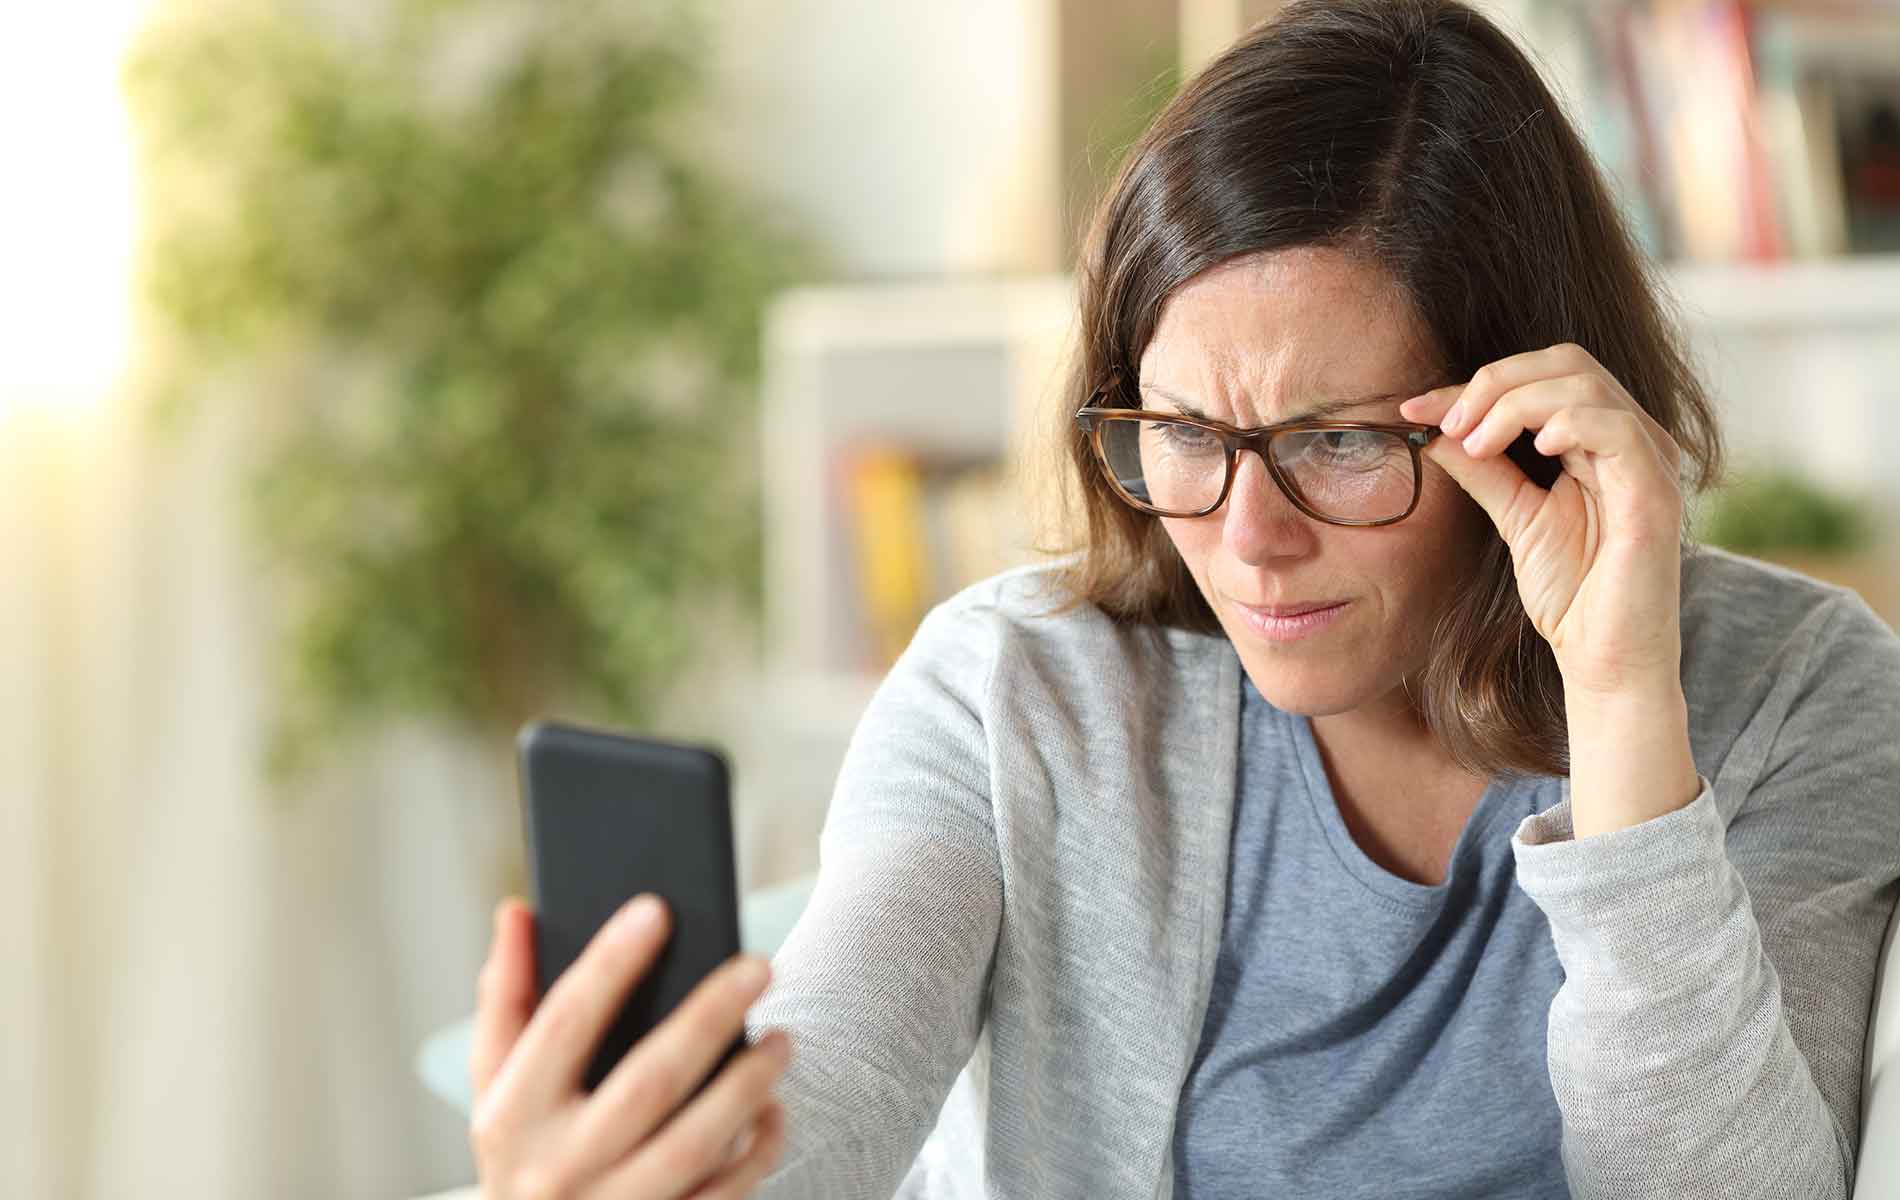 Woman having problem seeing  her mobile phone screen through the glasses.